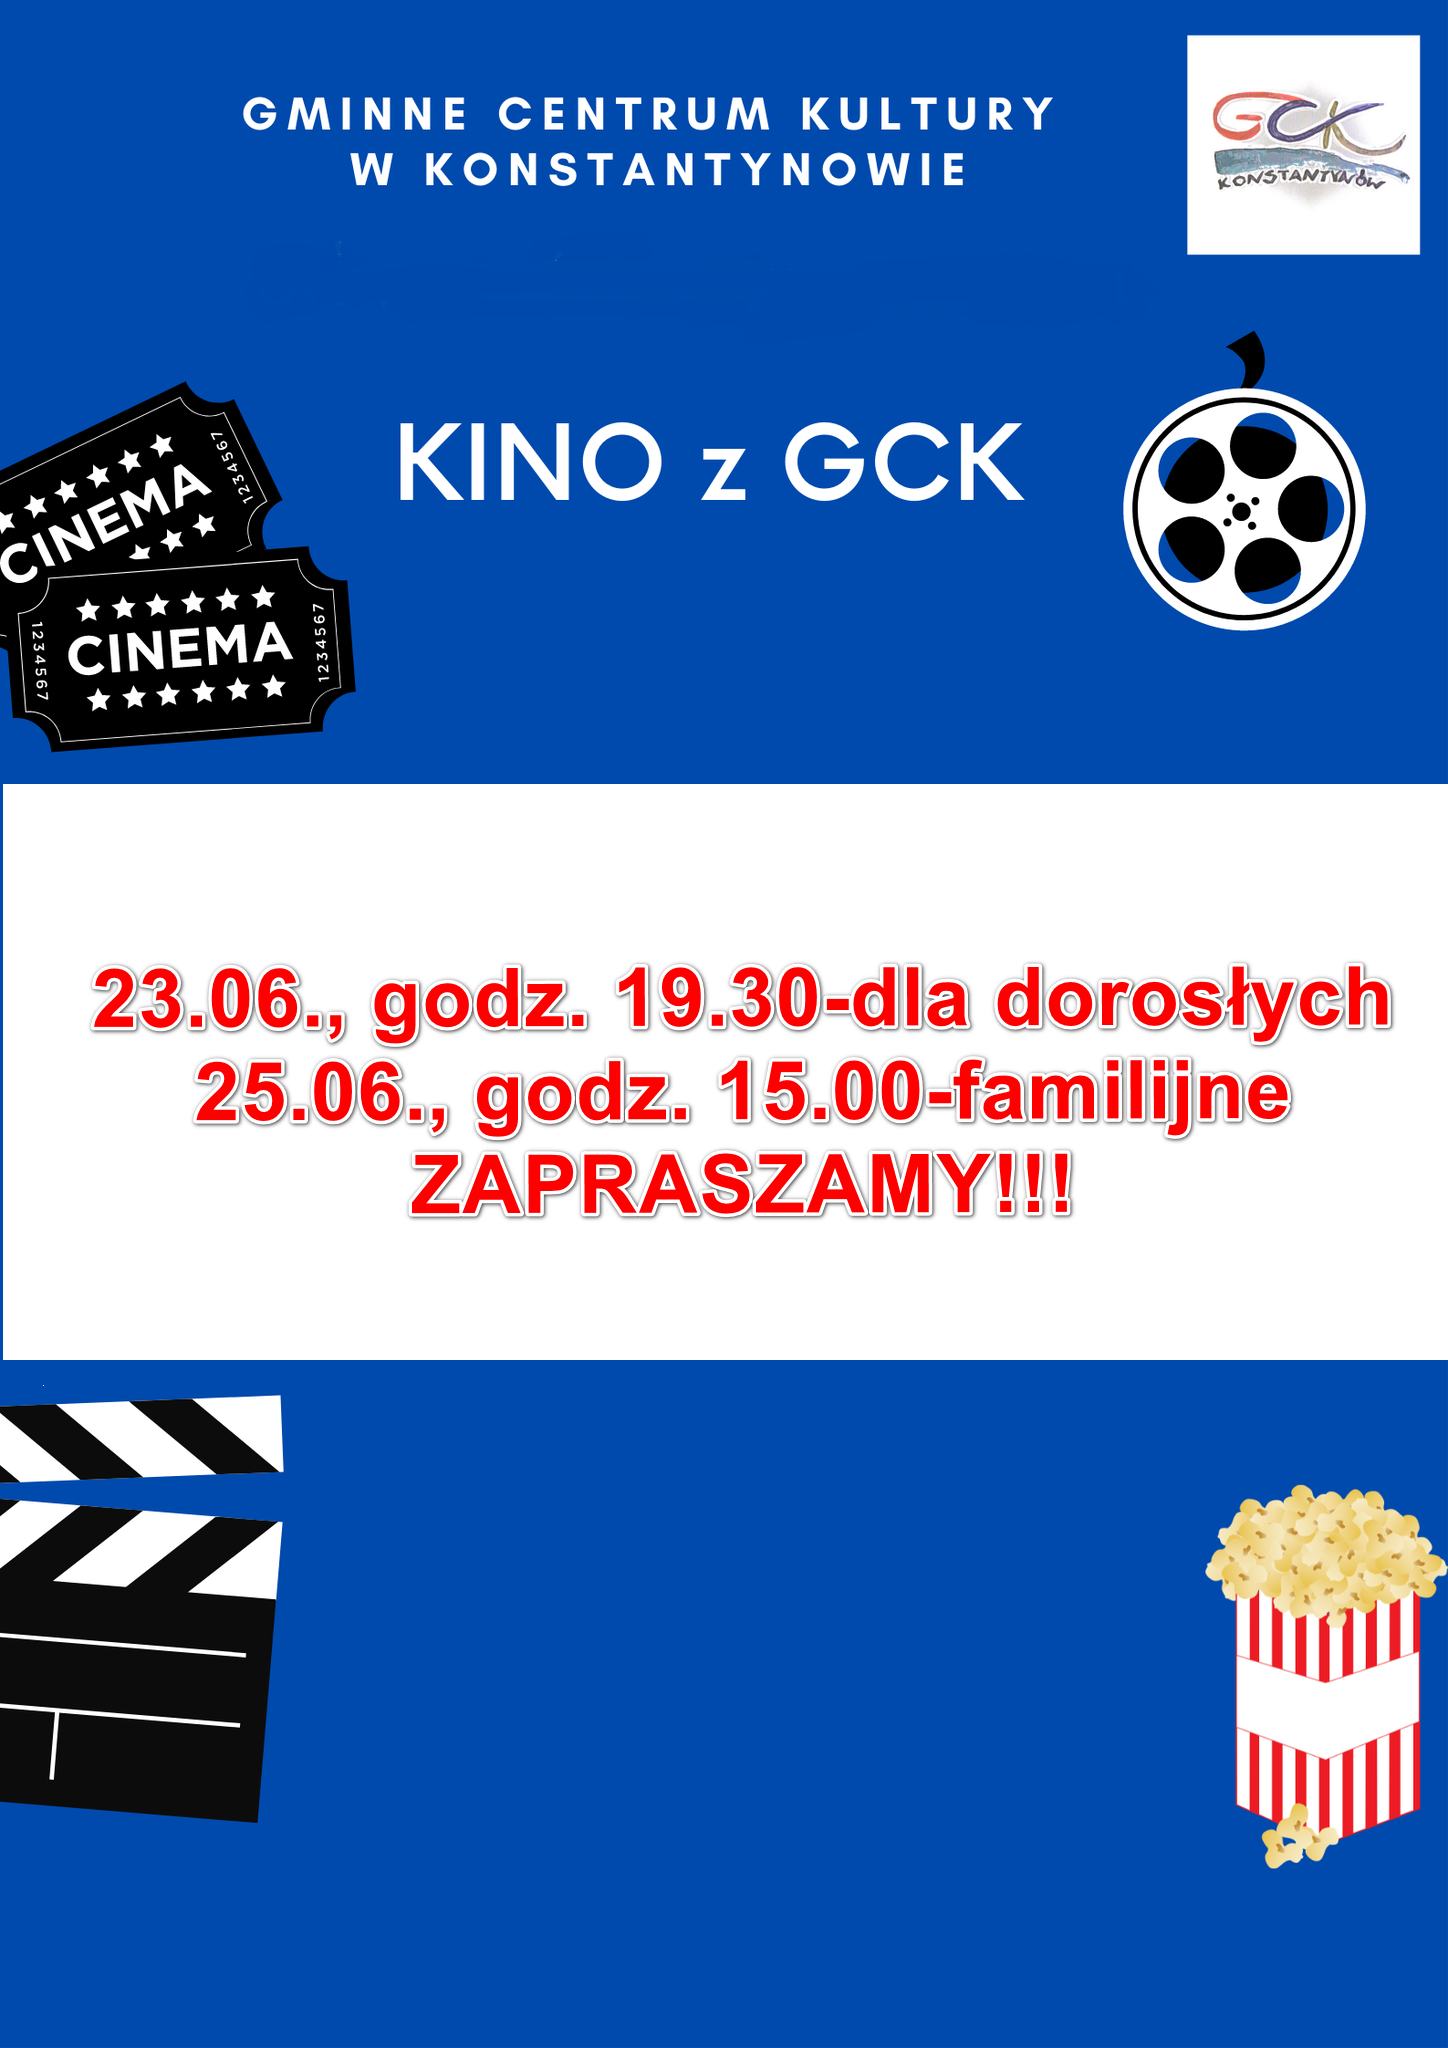 You are currently viewing KINO z GCK